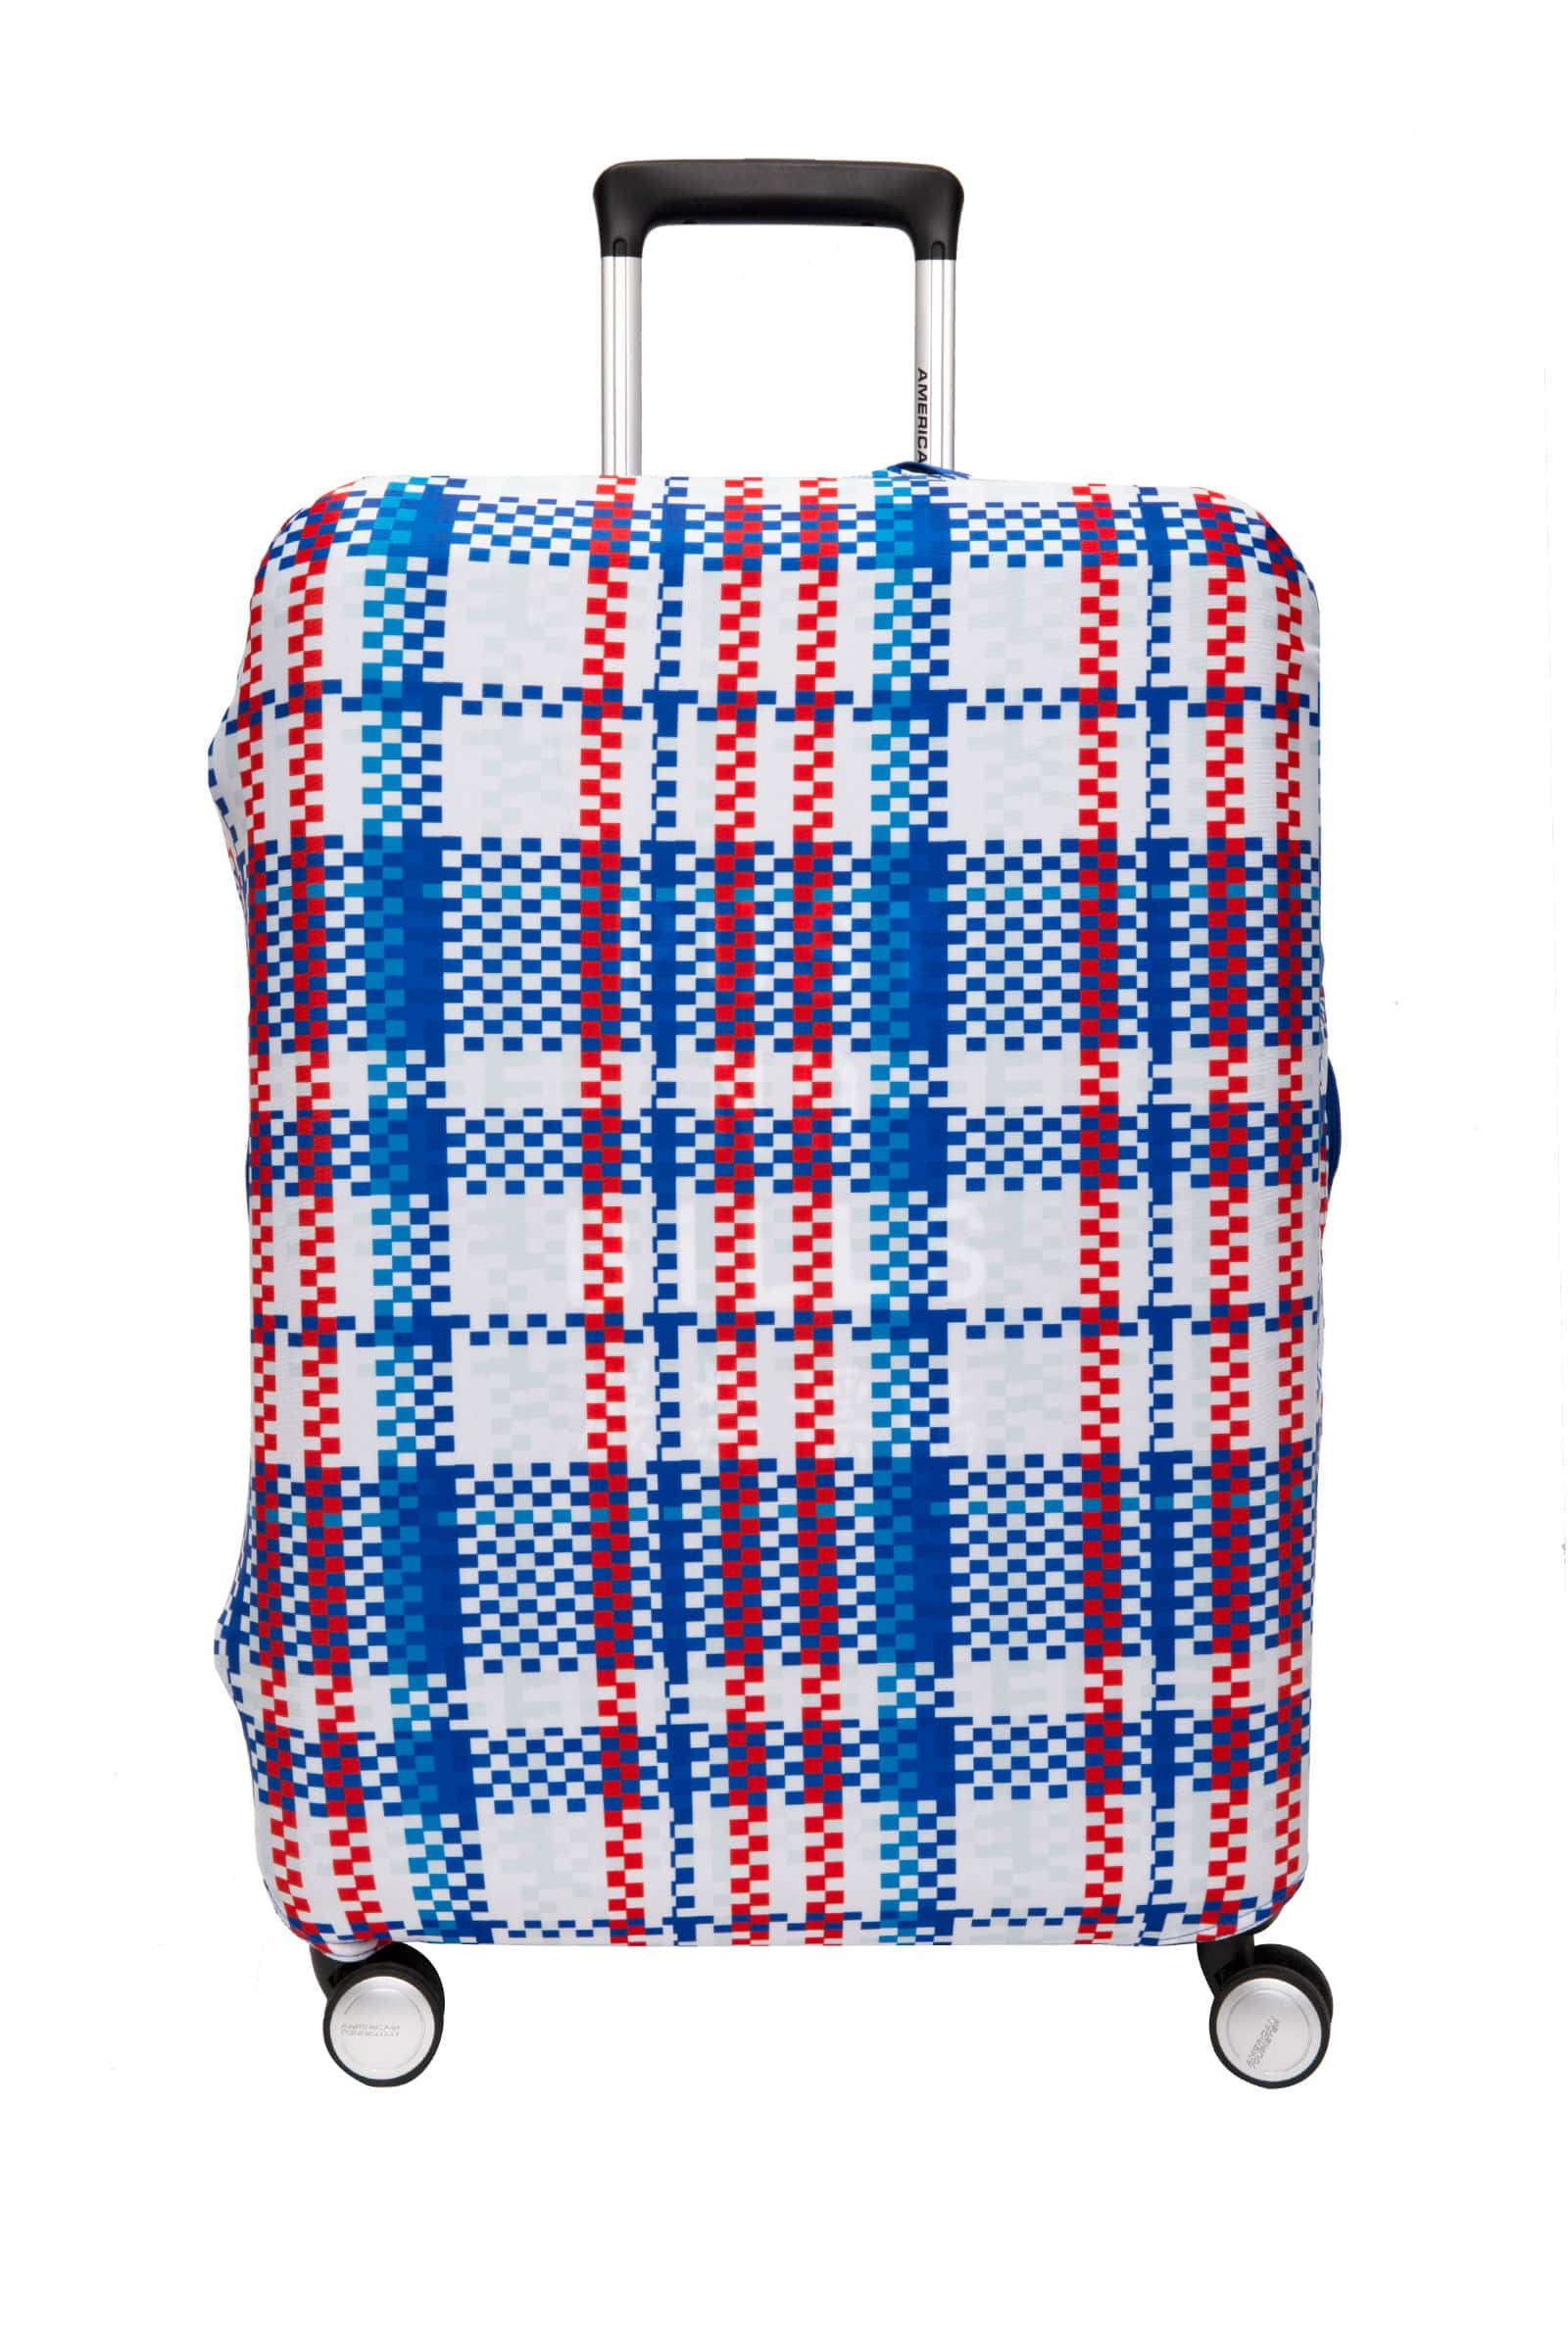 I COME FROM HK STRETCHABLE LUG.COVER L  size | American Tourister